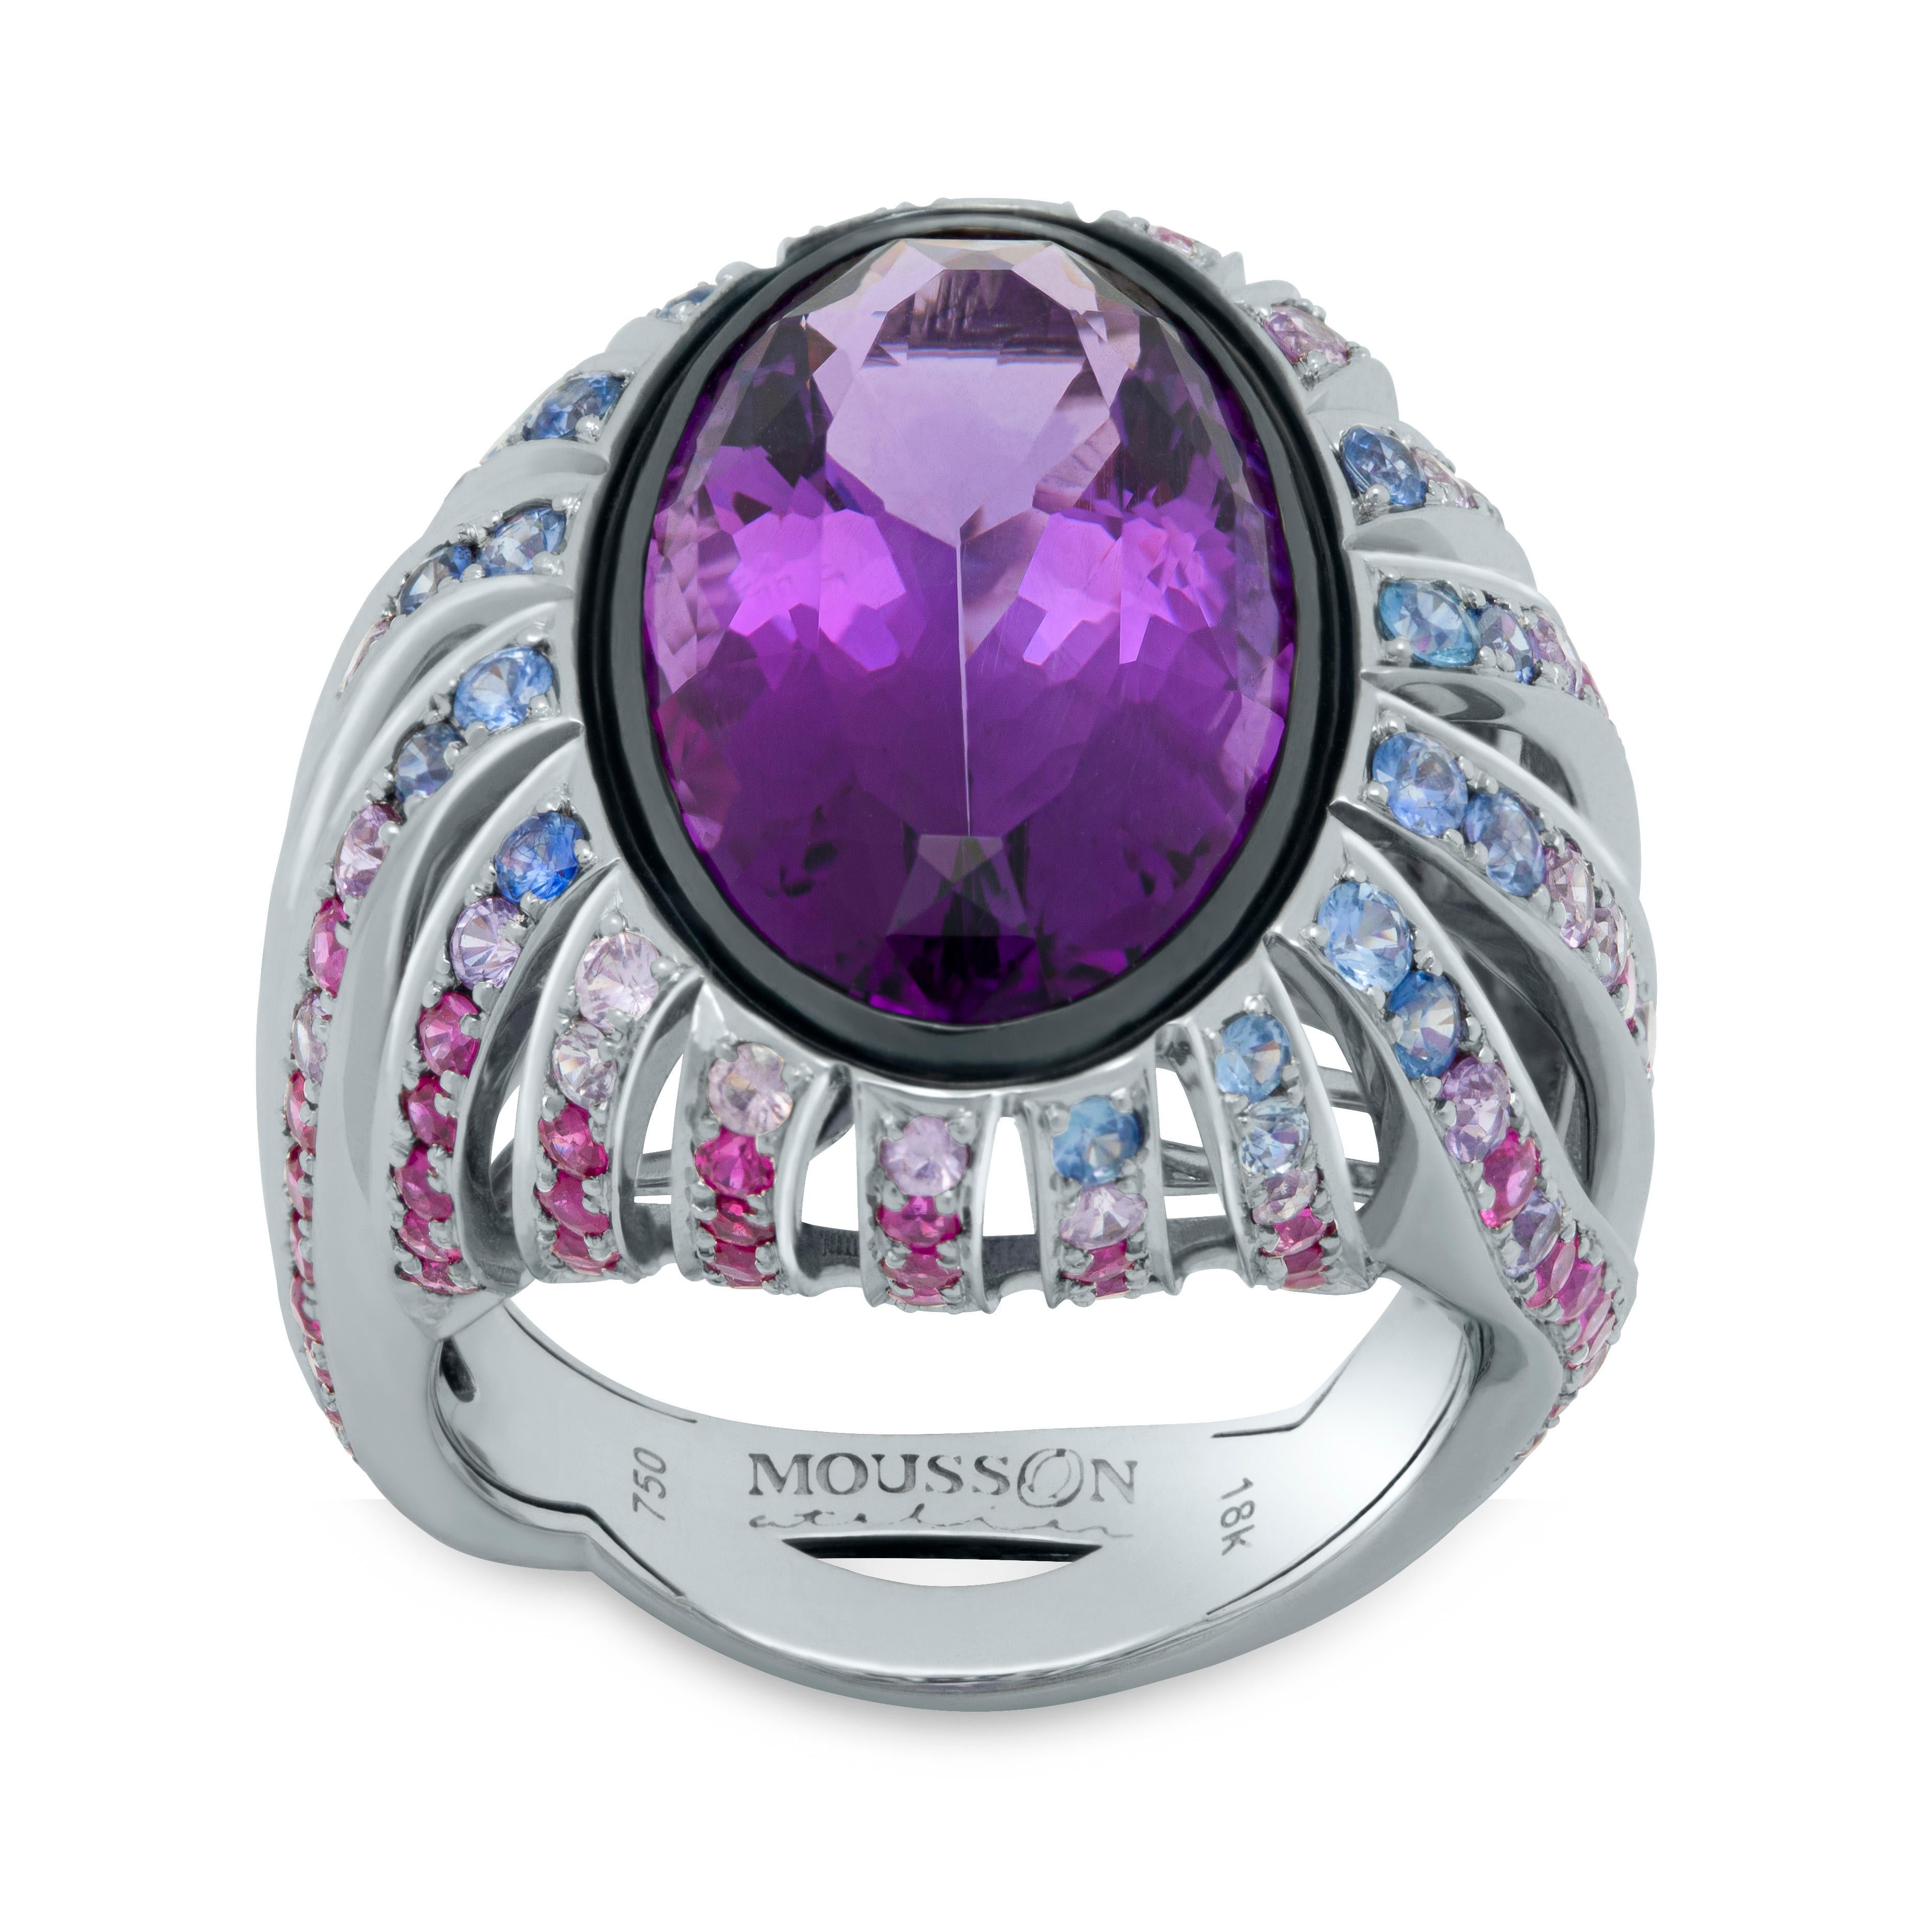 Amethyst 9.02 Carat Rubies Sapphires 18 Karat White Gold New Age Ring
An incredibly bright Oval-shape 9.02 Carat Amethyst, from which many 18 Karat White Gold paths slide down, where Pink, Blue and Purple Sapphires weighing total 1.86 Carat and 100